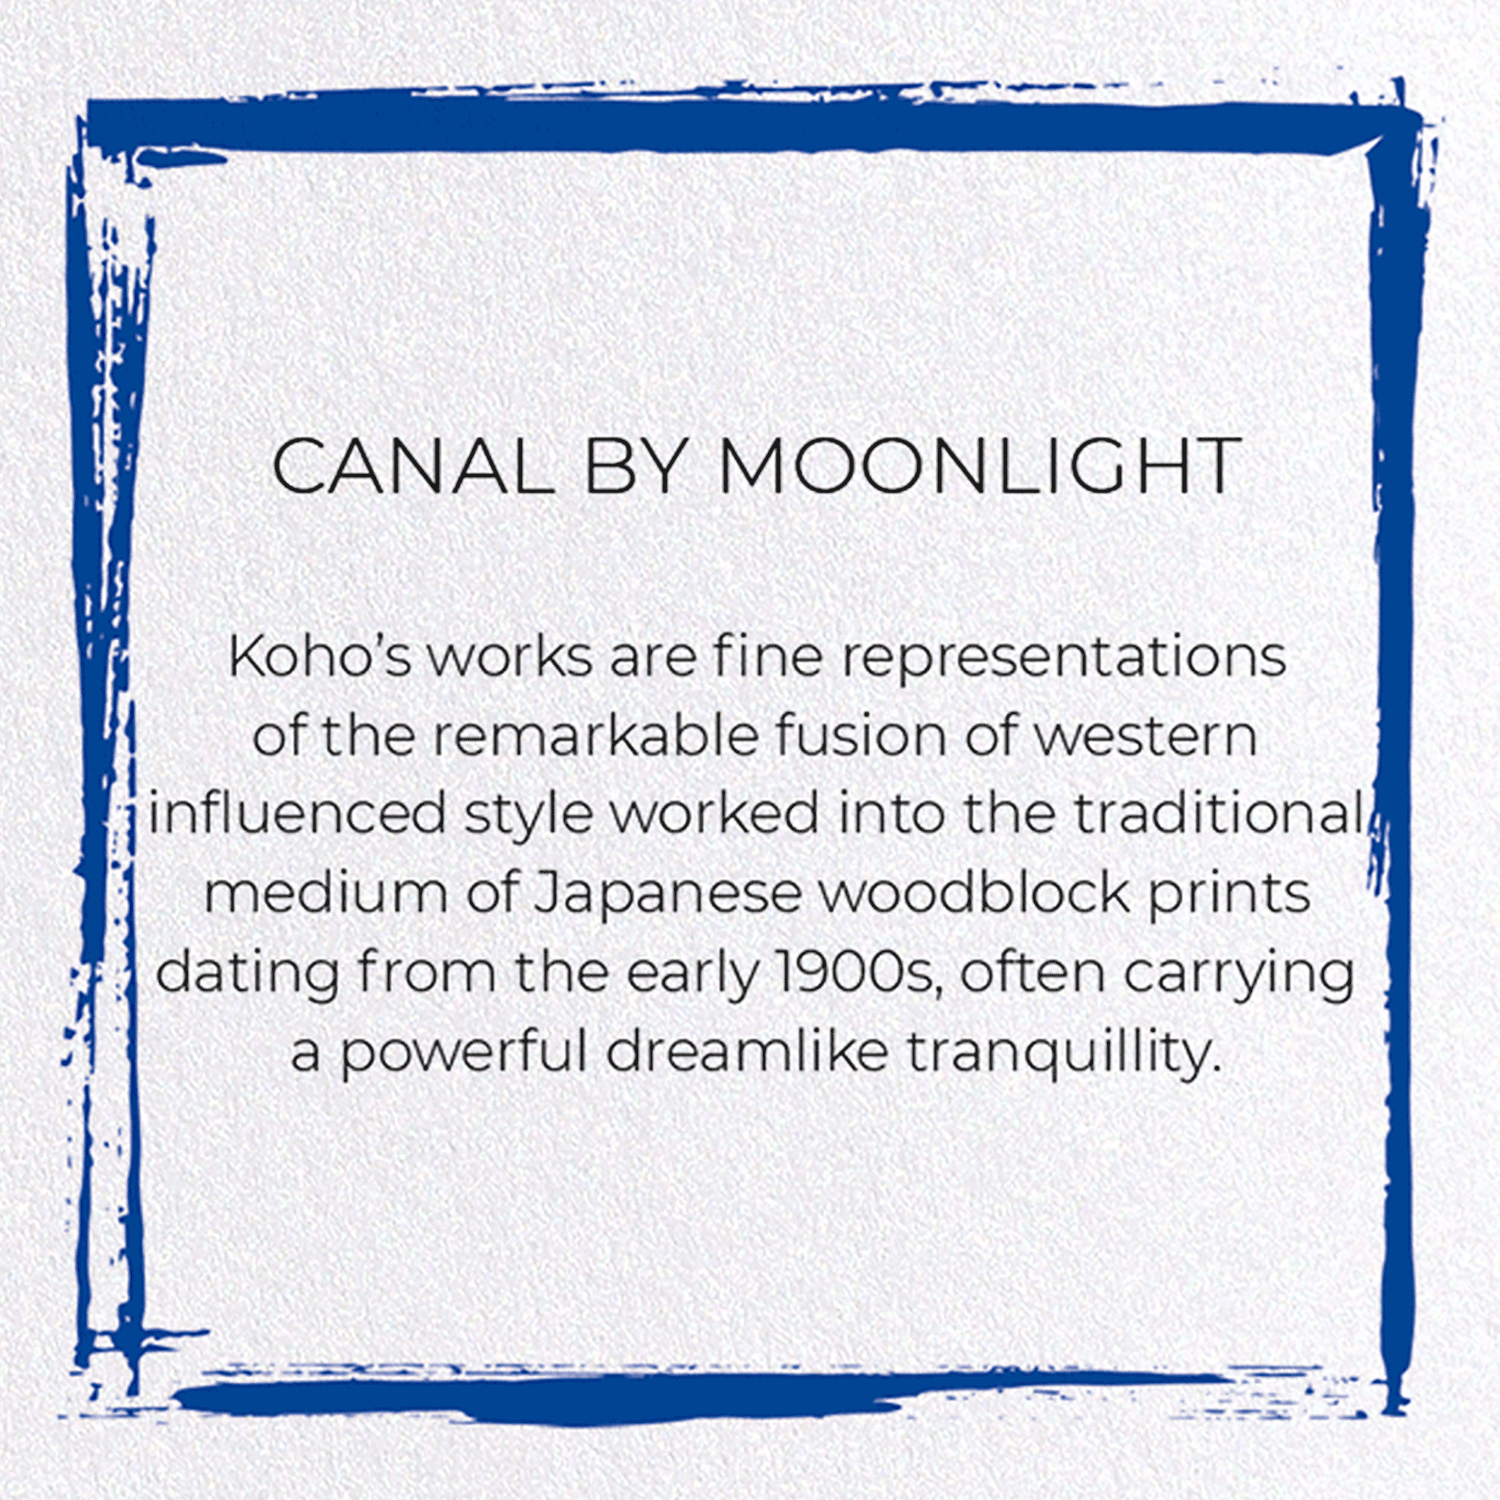 CANAL BY MOONLIGHT